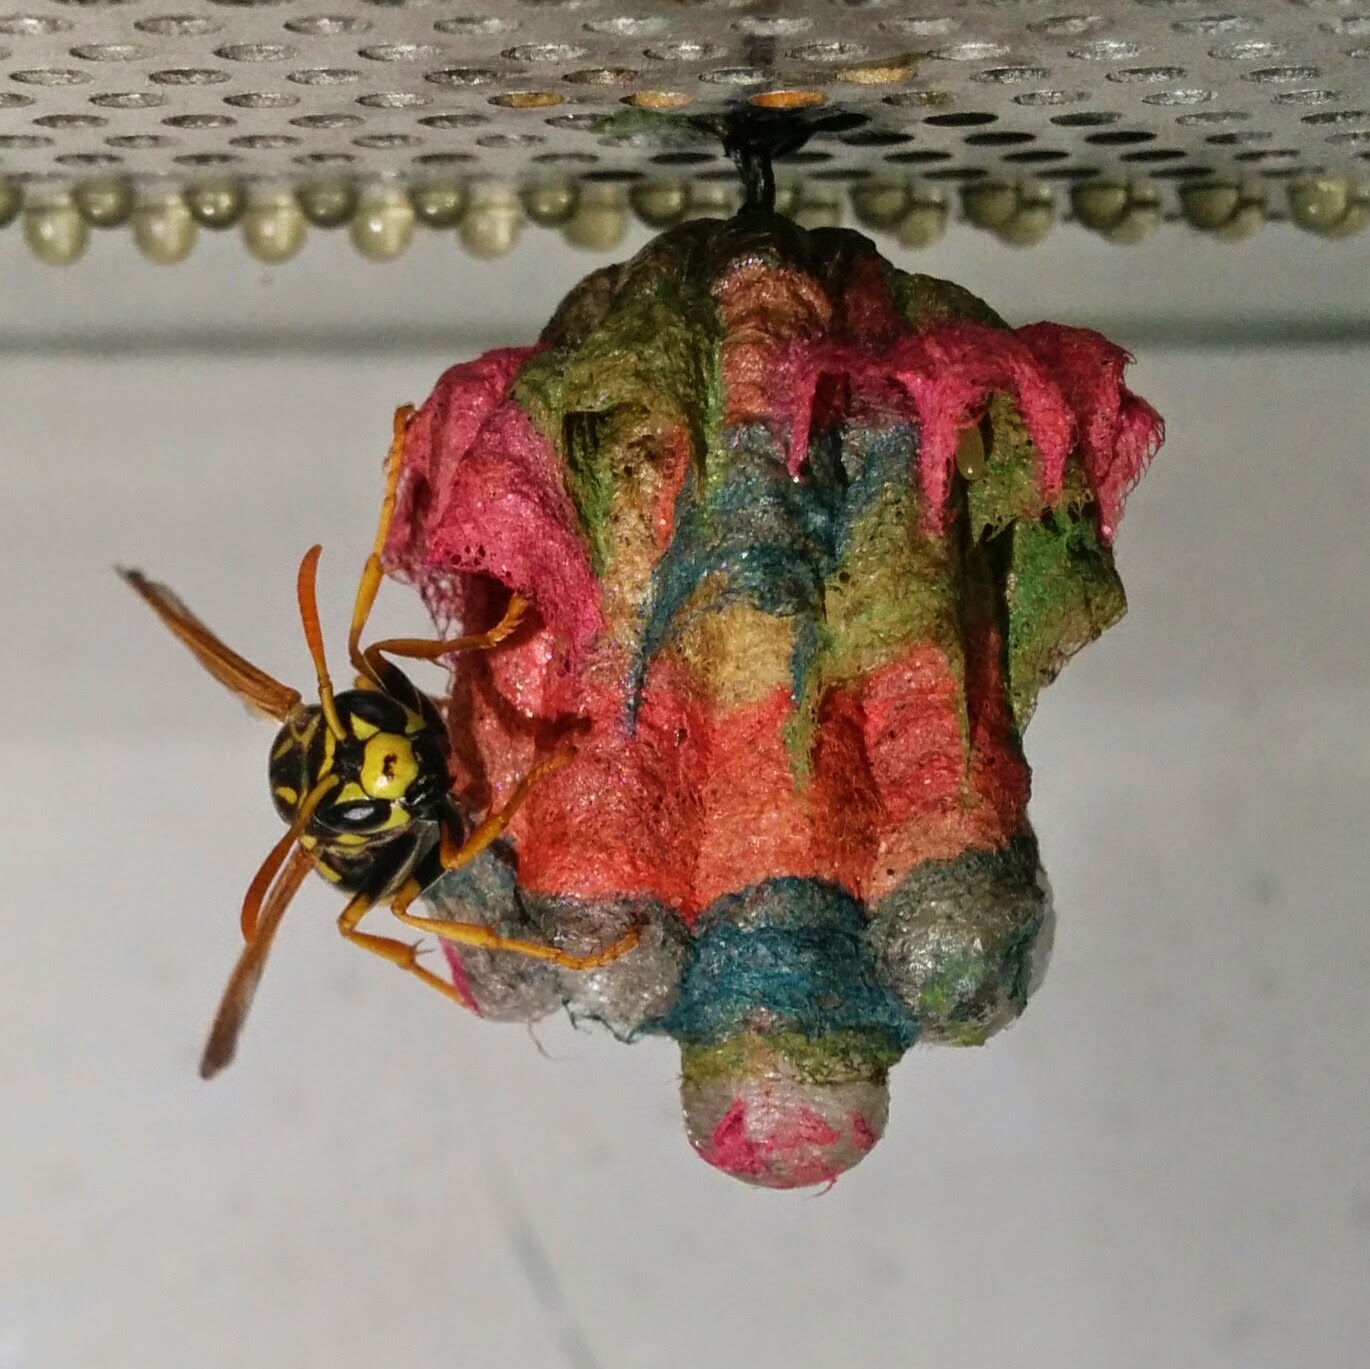 Rainbow colored nests built by wasps.   ,     